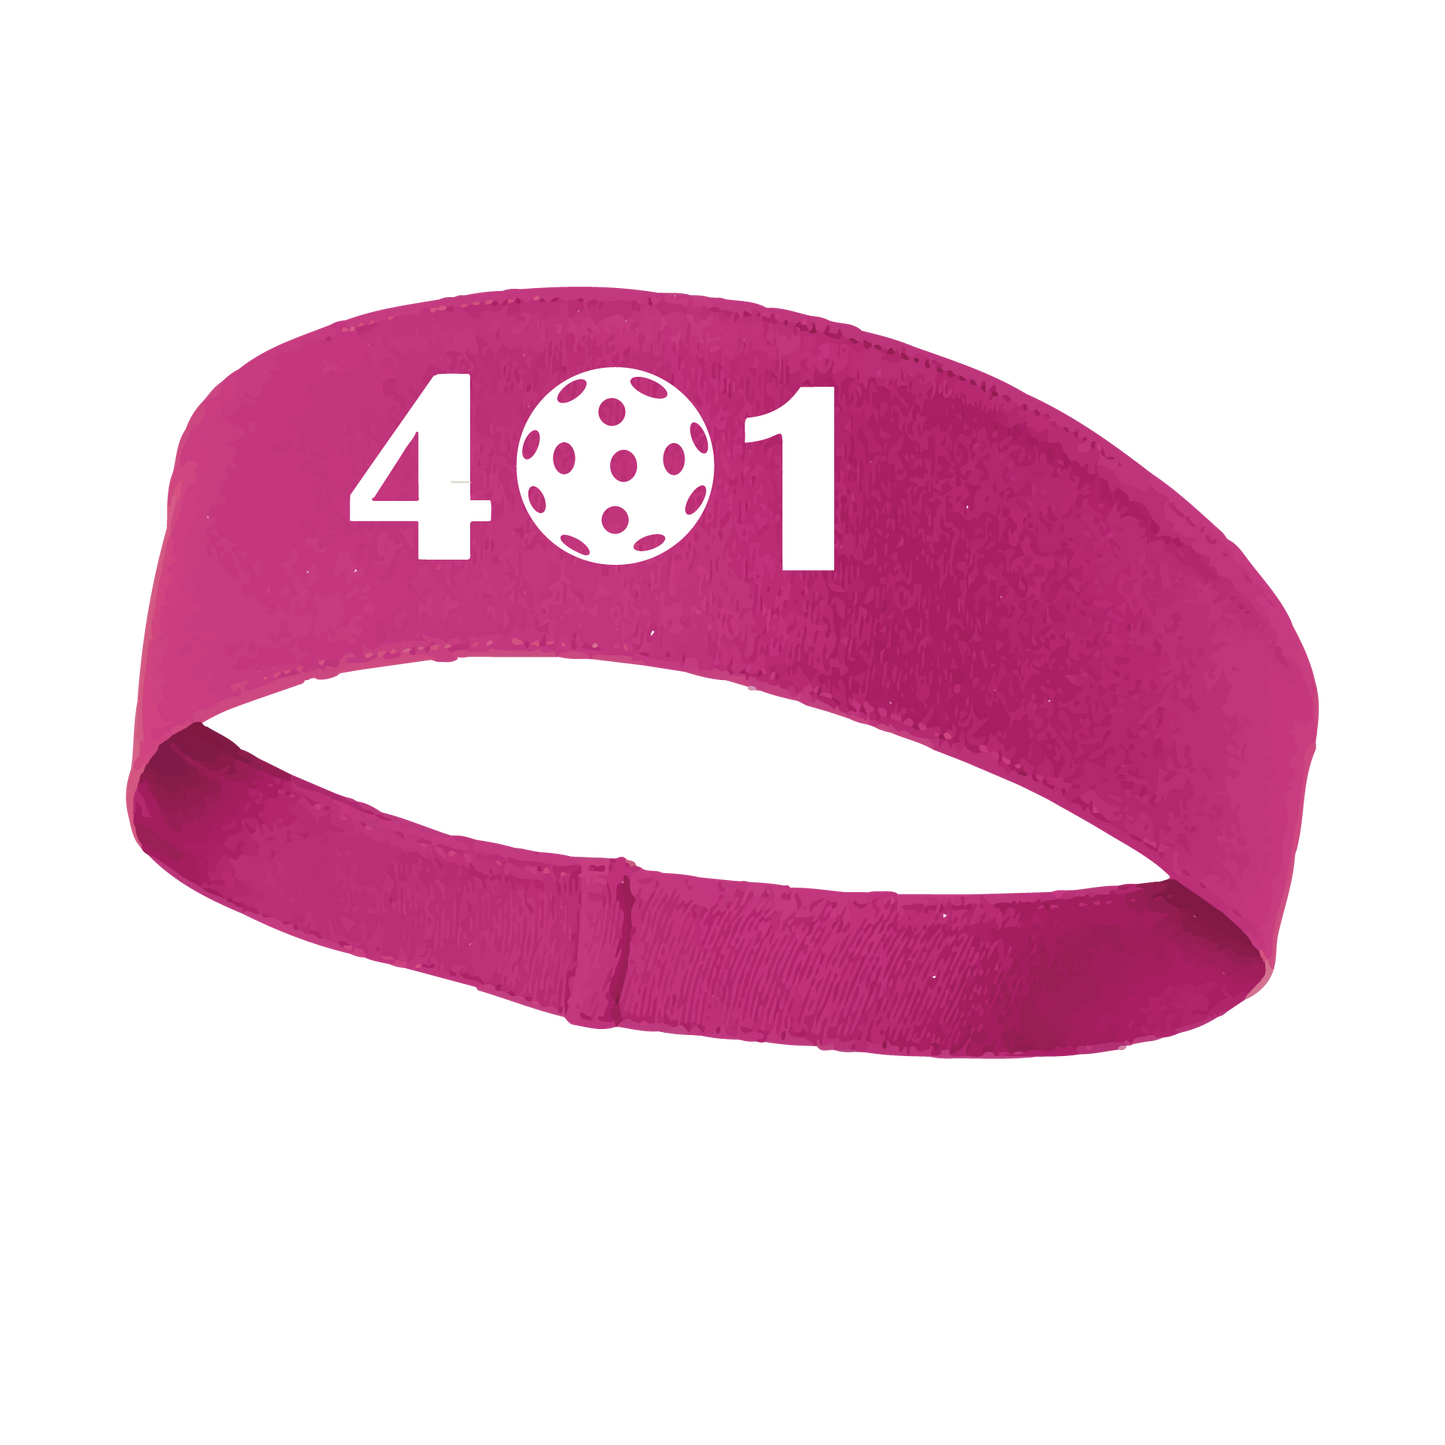 Design: 401 Rhode Island Pickleball Club  This fun, pickleball designed, moisture-wicking headband narrows in the back to fit more securely. Single-needle top-stitched edging. These headbands come in a variety of colors. Truly shows your love for the sport of pickleball!!